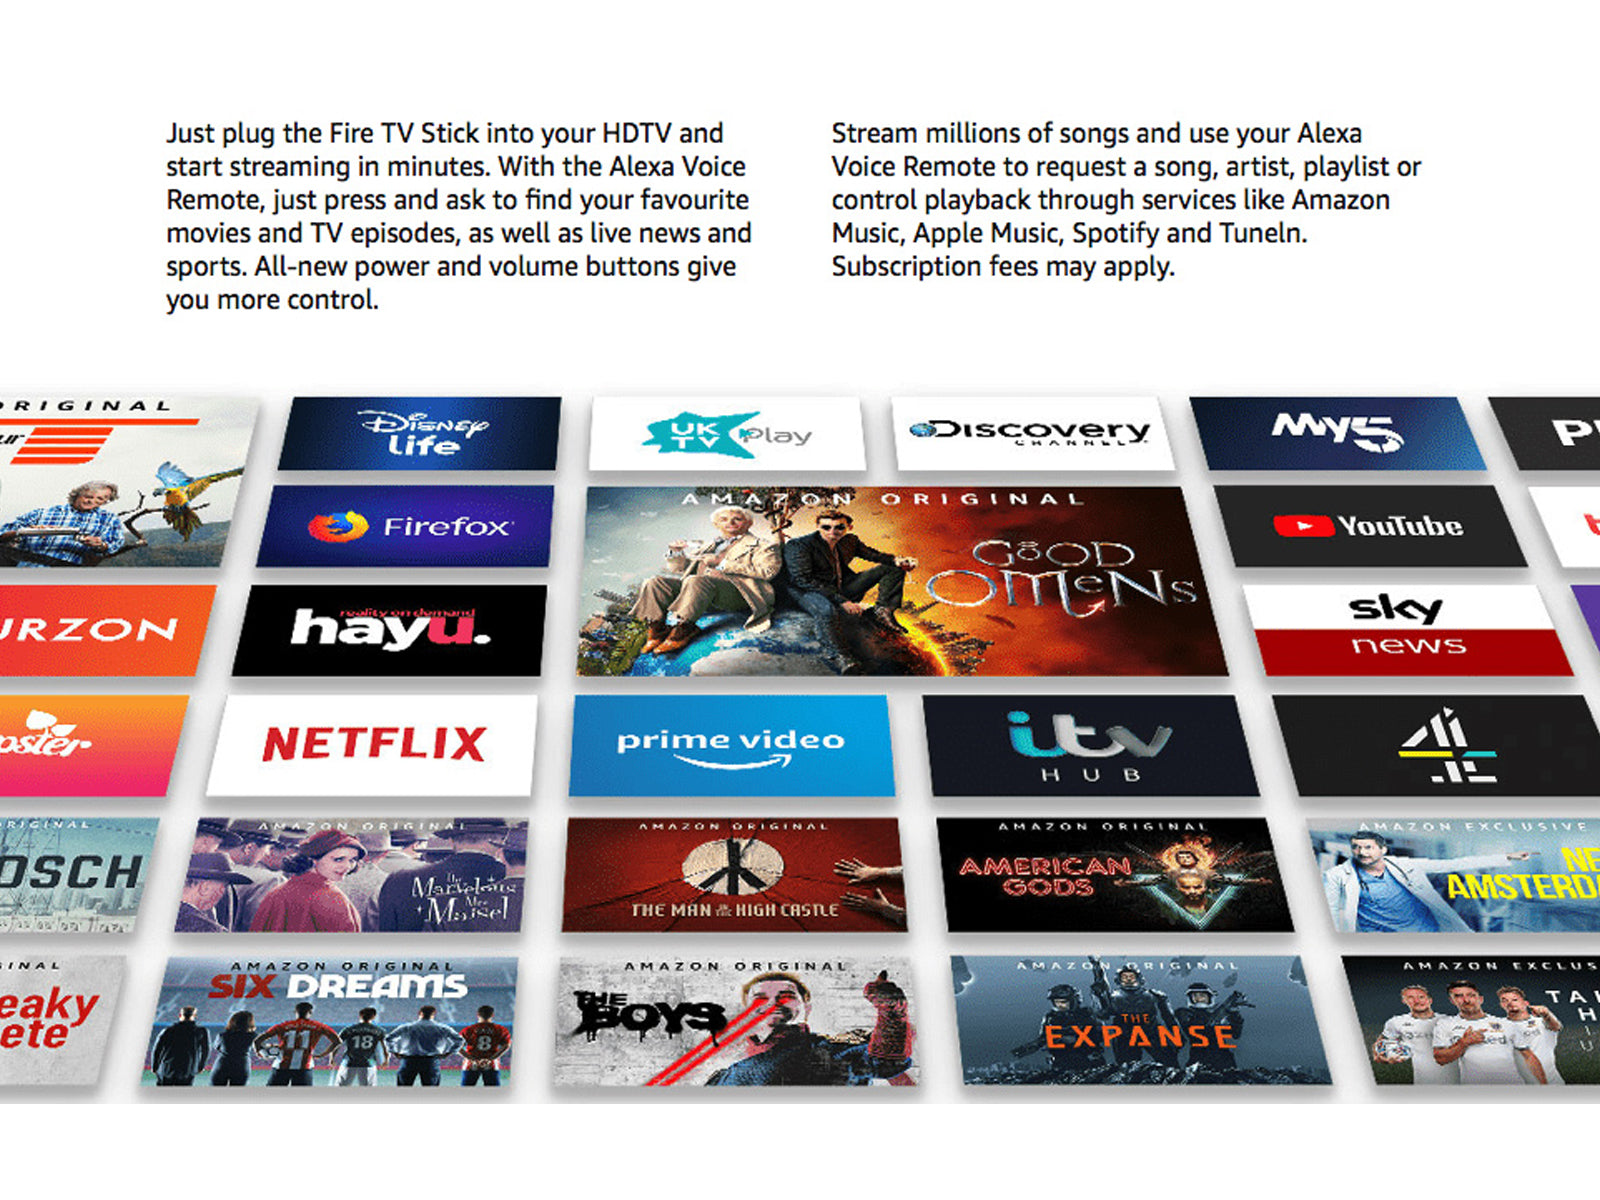 Image shows information about the Amazon Fire TV Stick Lite 